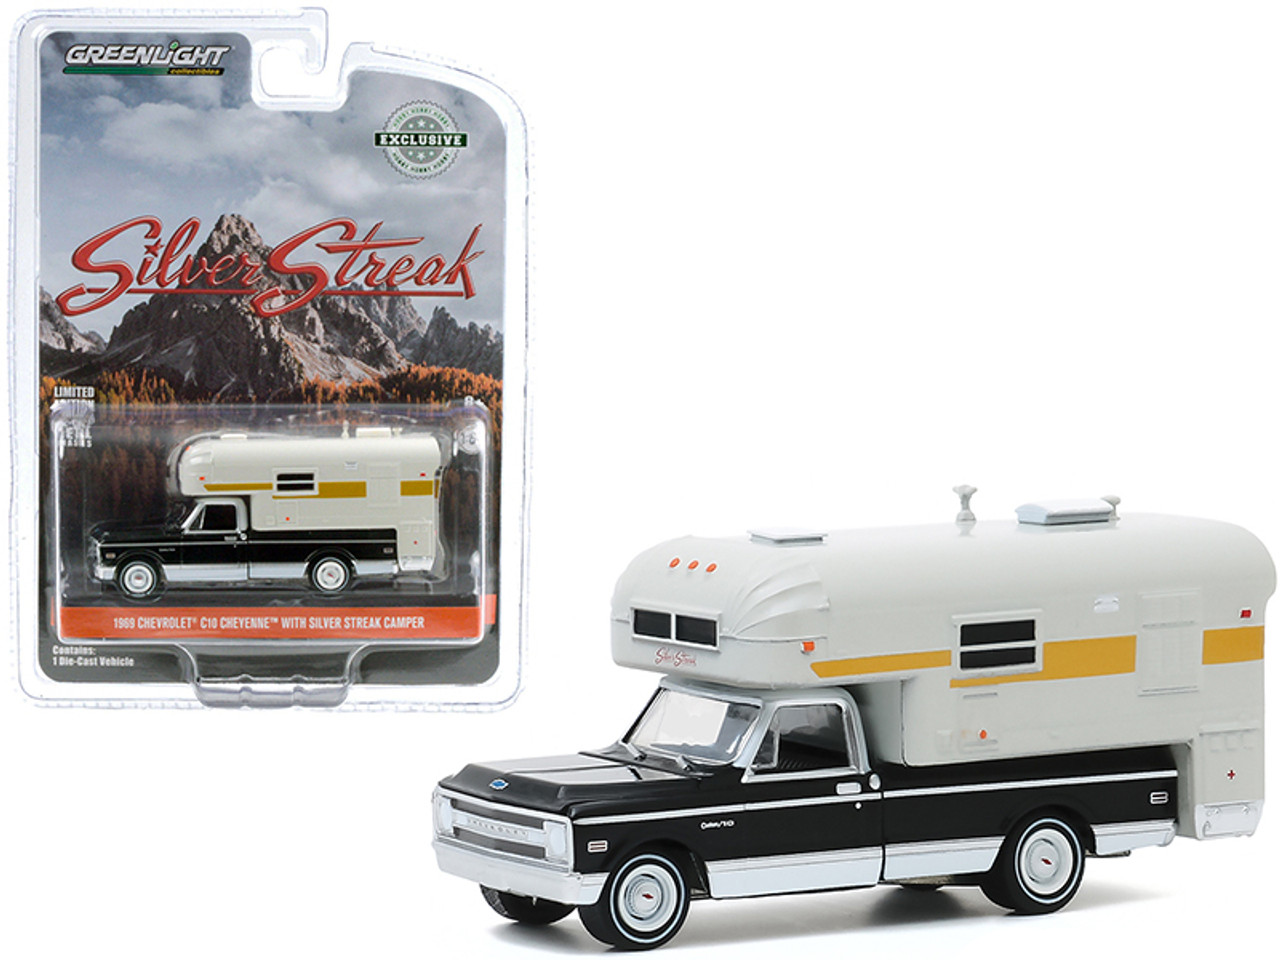 1969 Chevrolet C10 Cheyenne Pickup Truck with Silver Streak Camper Black and Cream "Hobby Exclusive" 1/64 Diecast Model Car by Greenlight